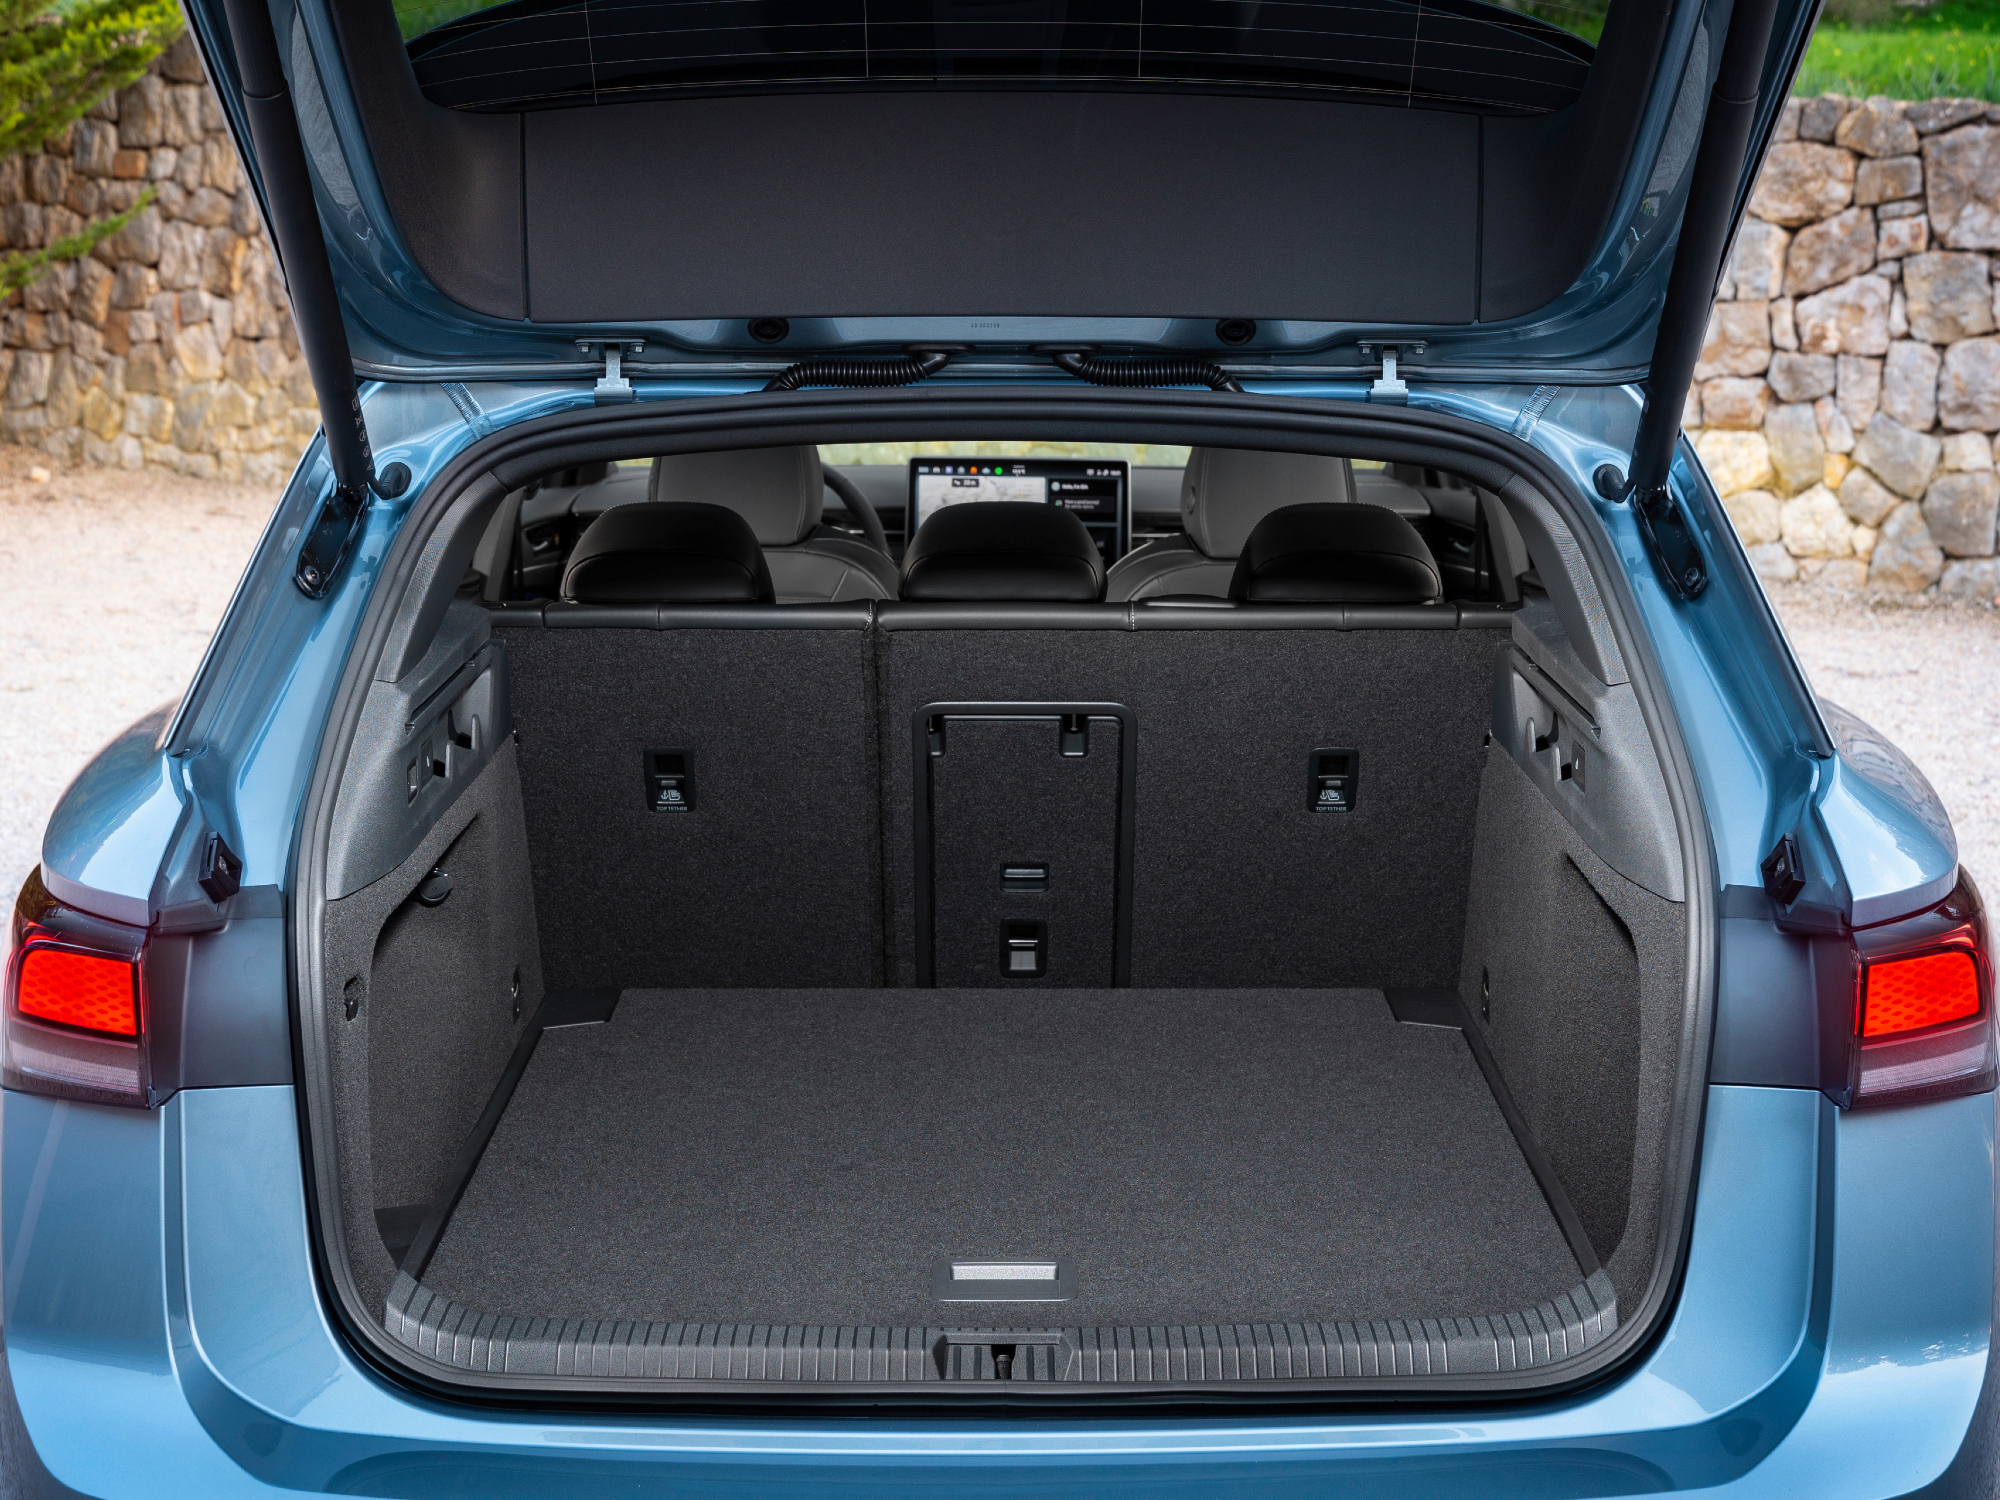 VW ID.7 concept cargo space behind 2nd row of seats.